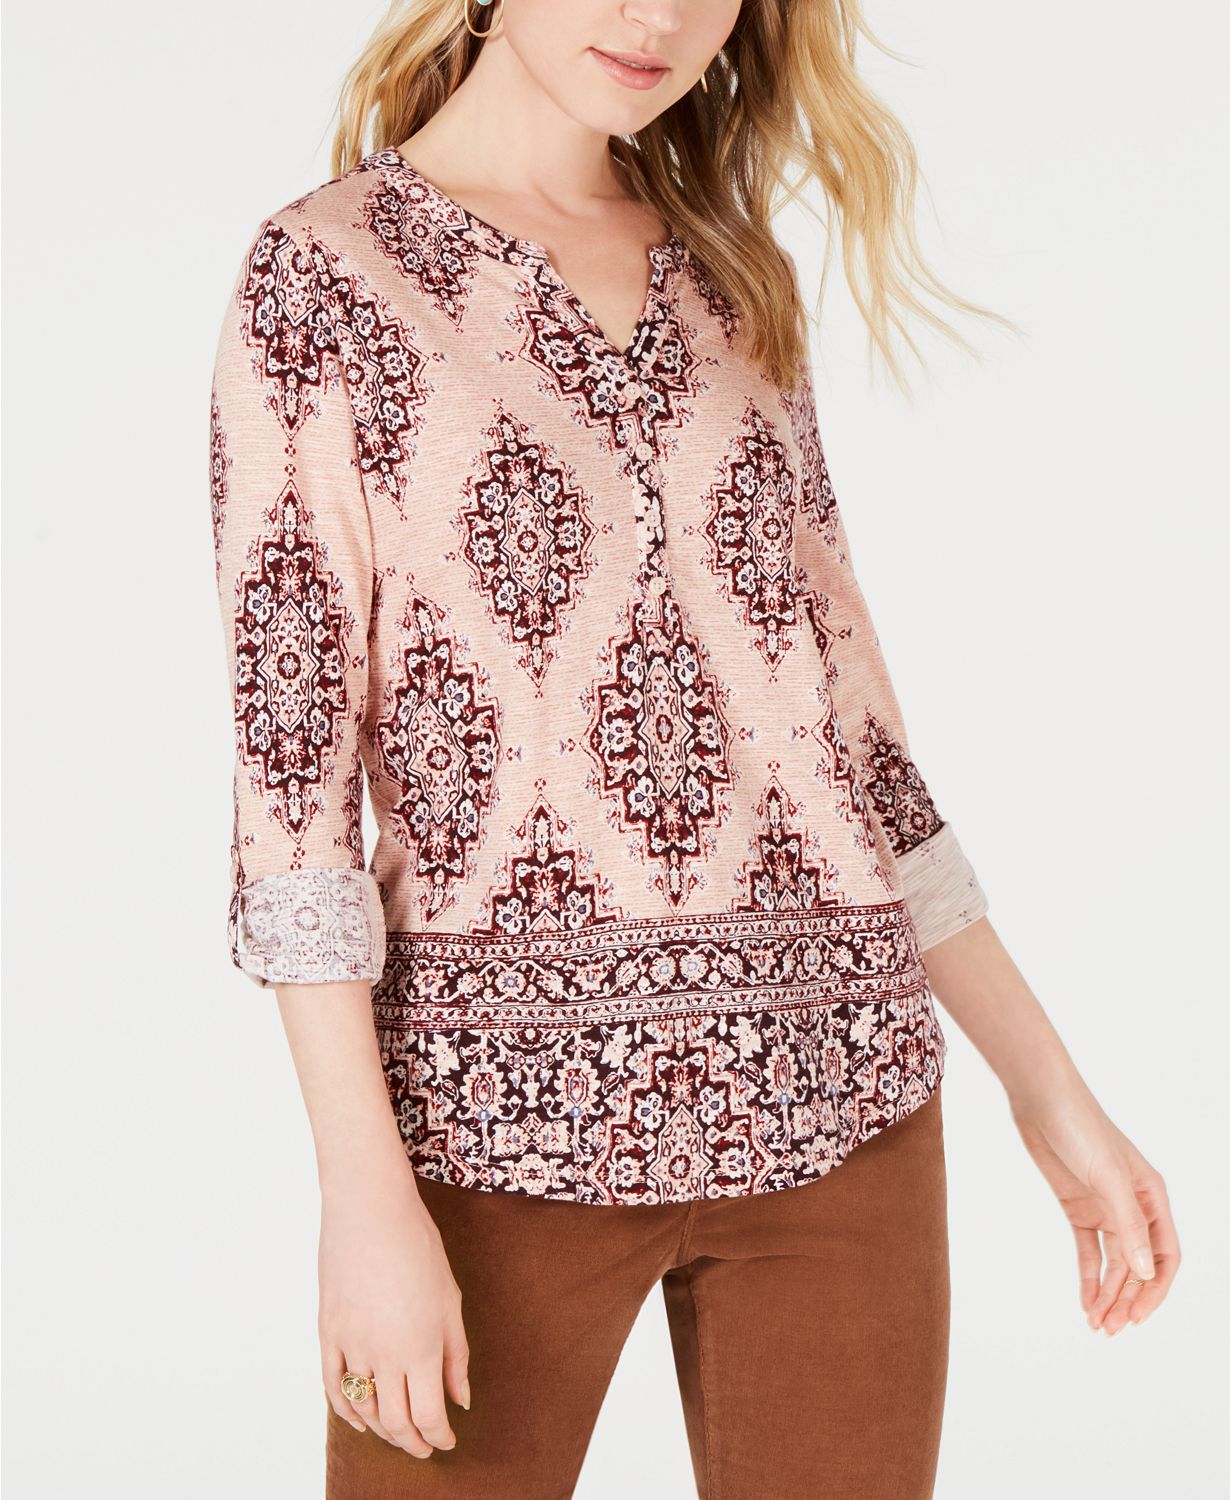 Style & Co. Printed Utility Top (Natural Blush XXL)